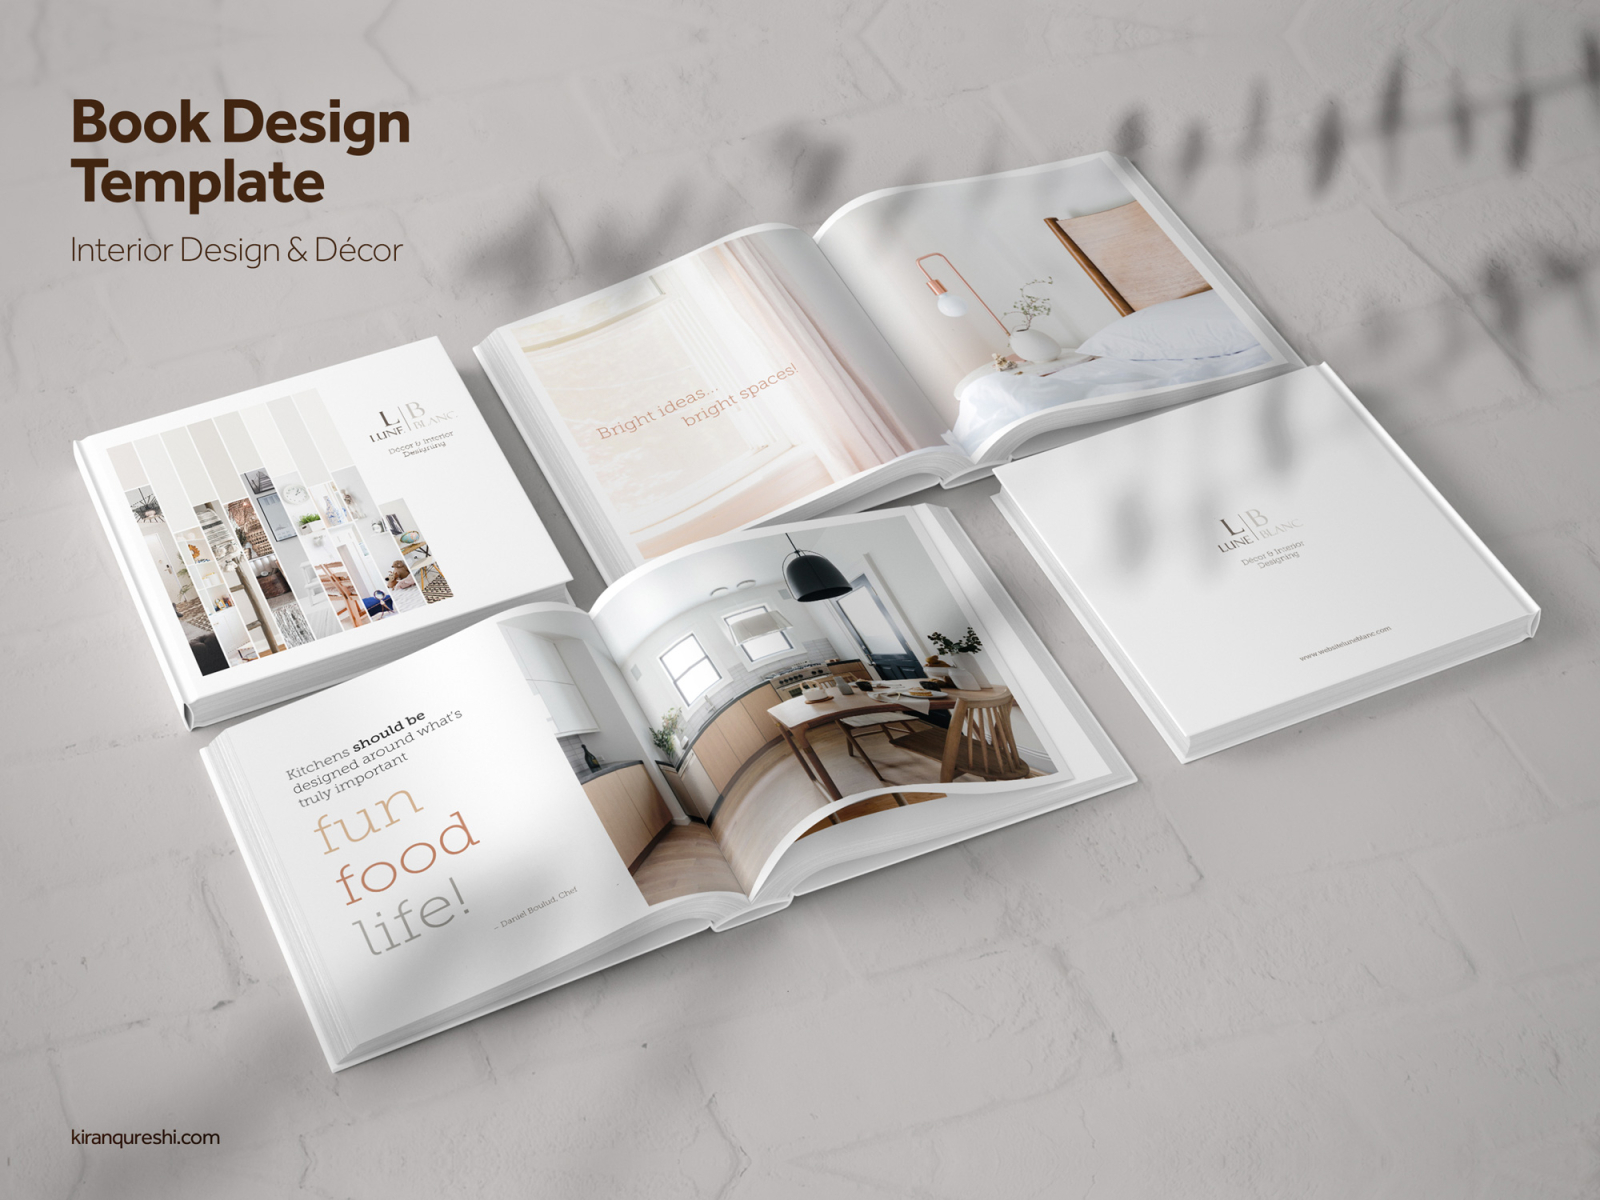 Coffee Table Book | Interior Design & Décor by Kiran Qureshi on Dribbble